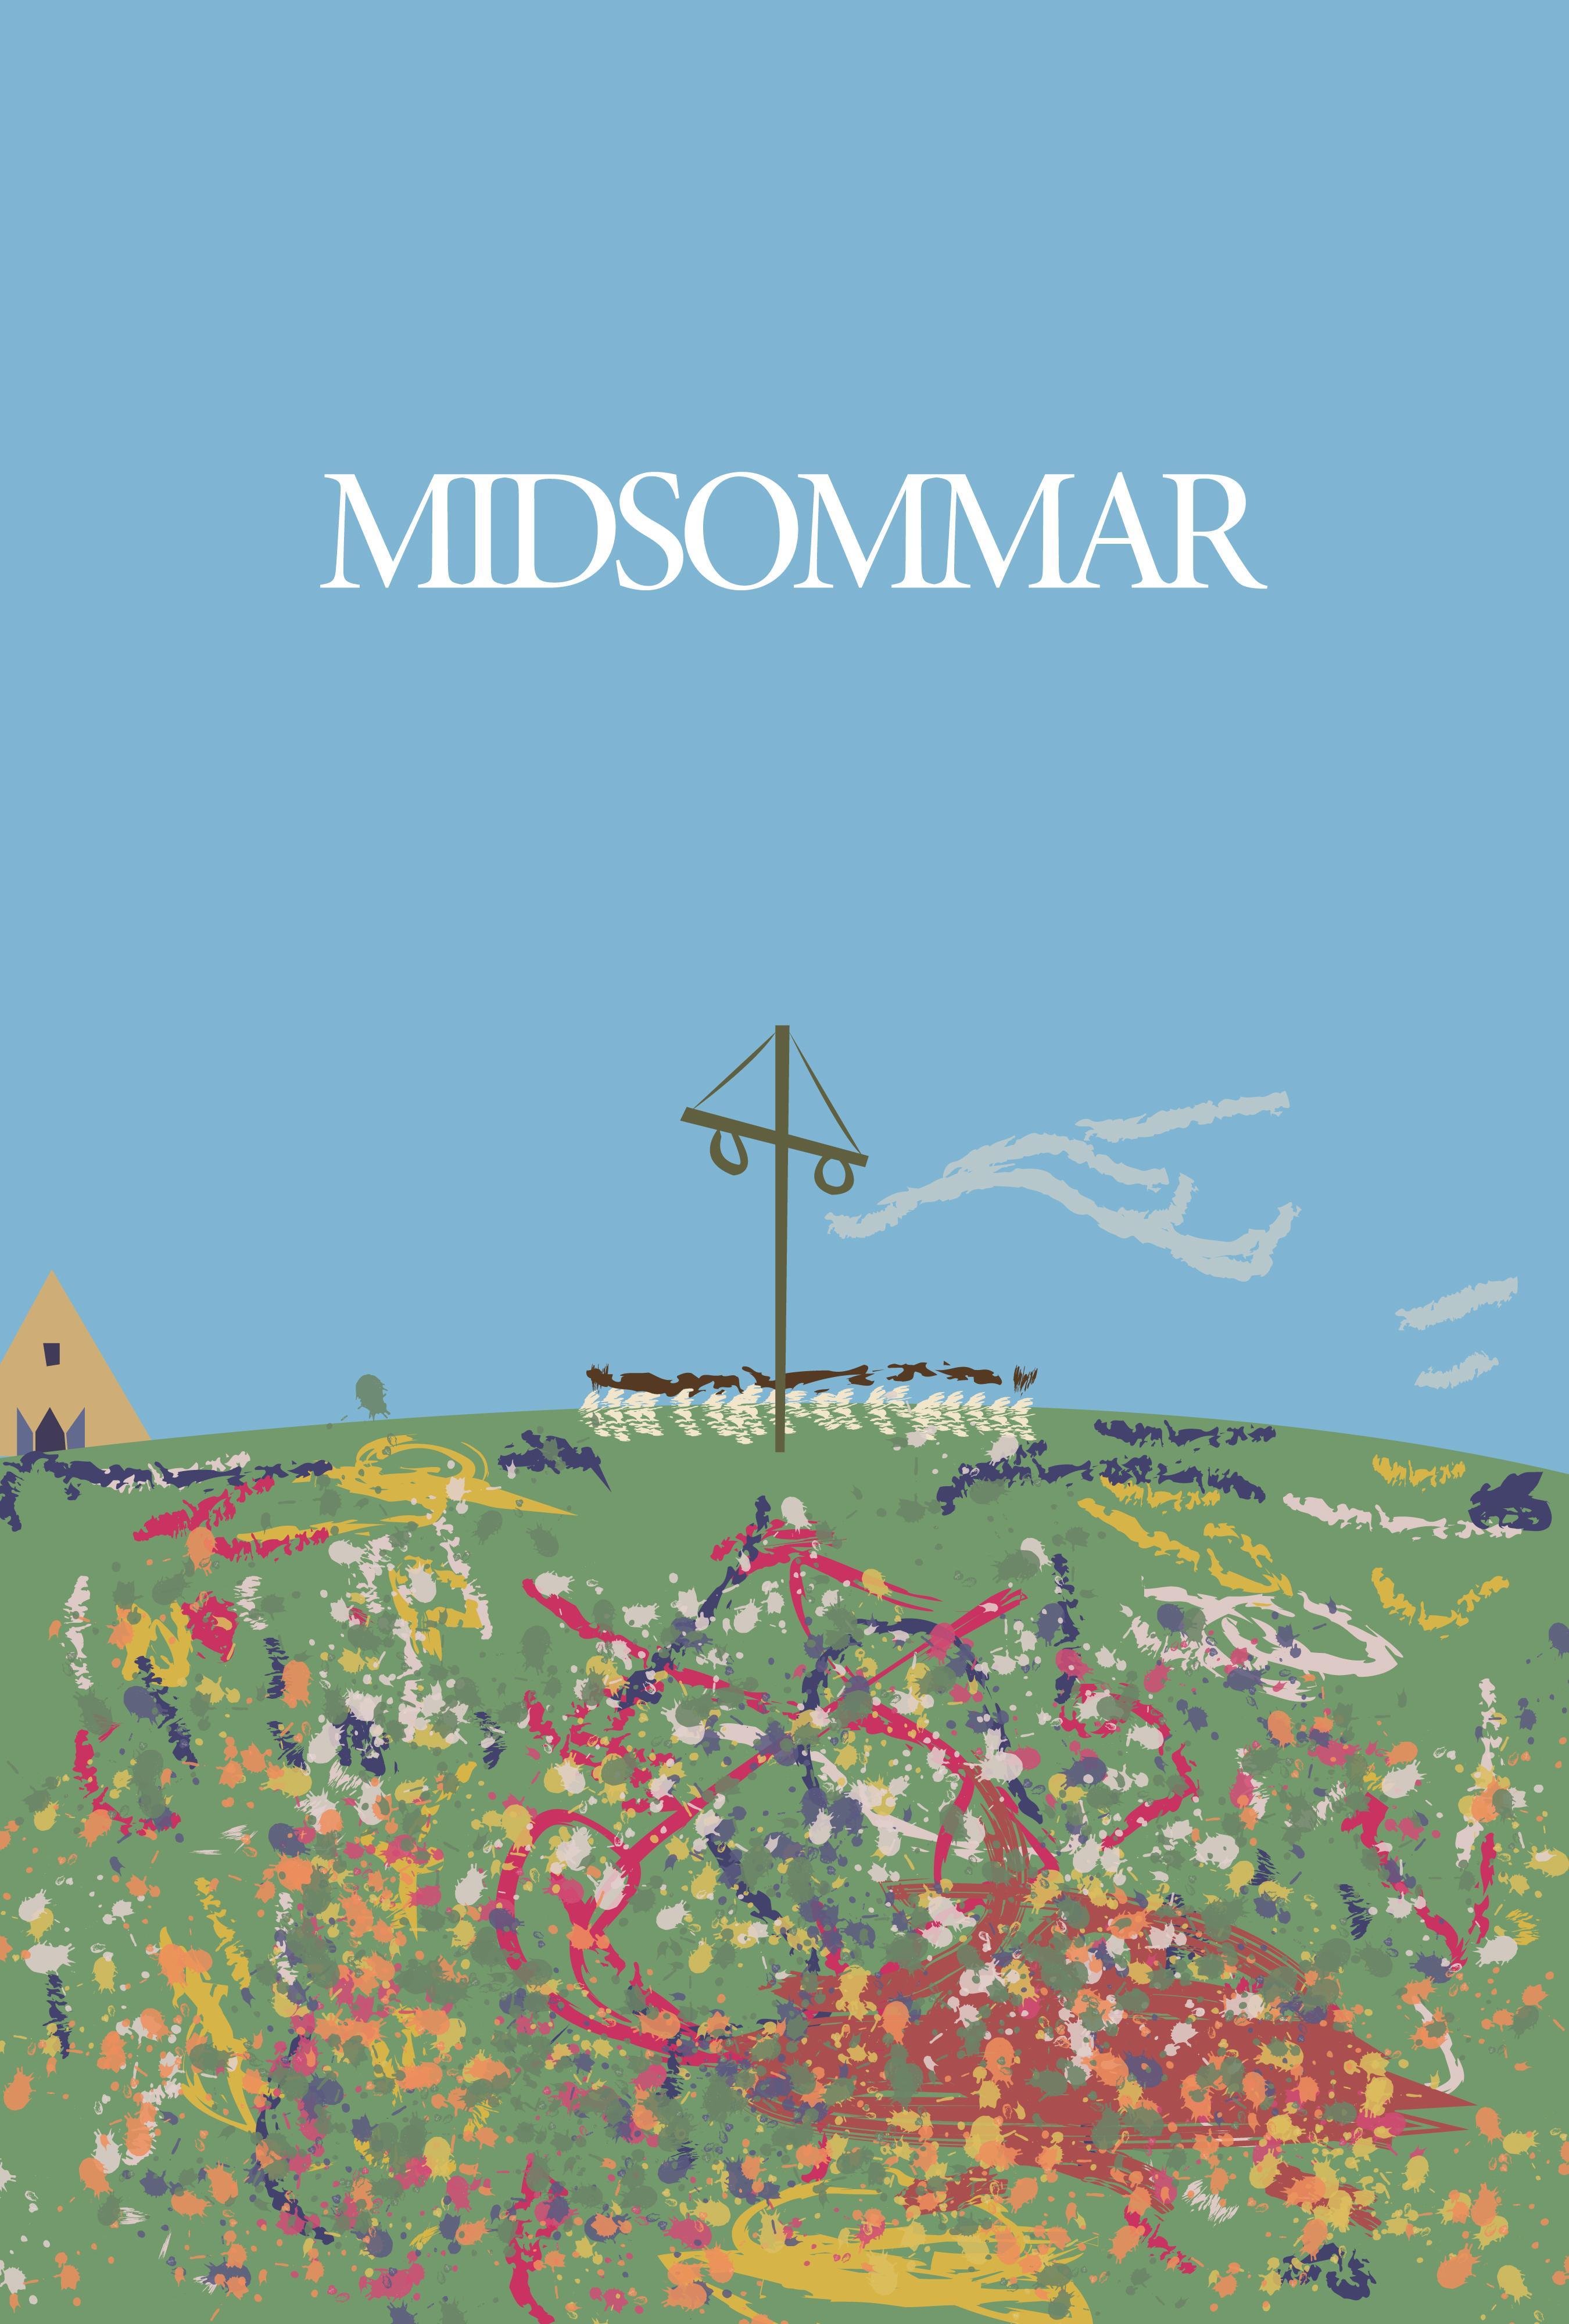 Hd Android Midsommar Wallpapers - Wallpaper Cave